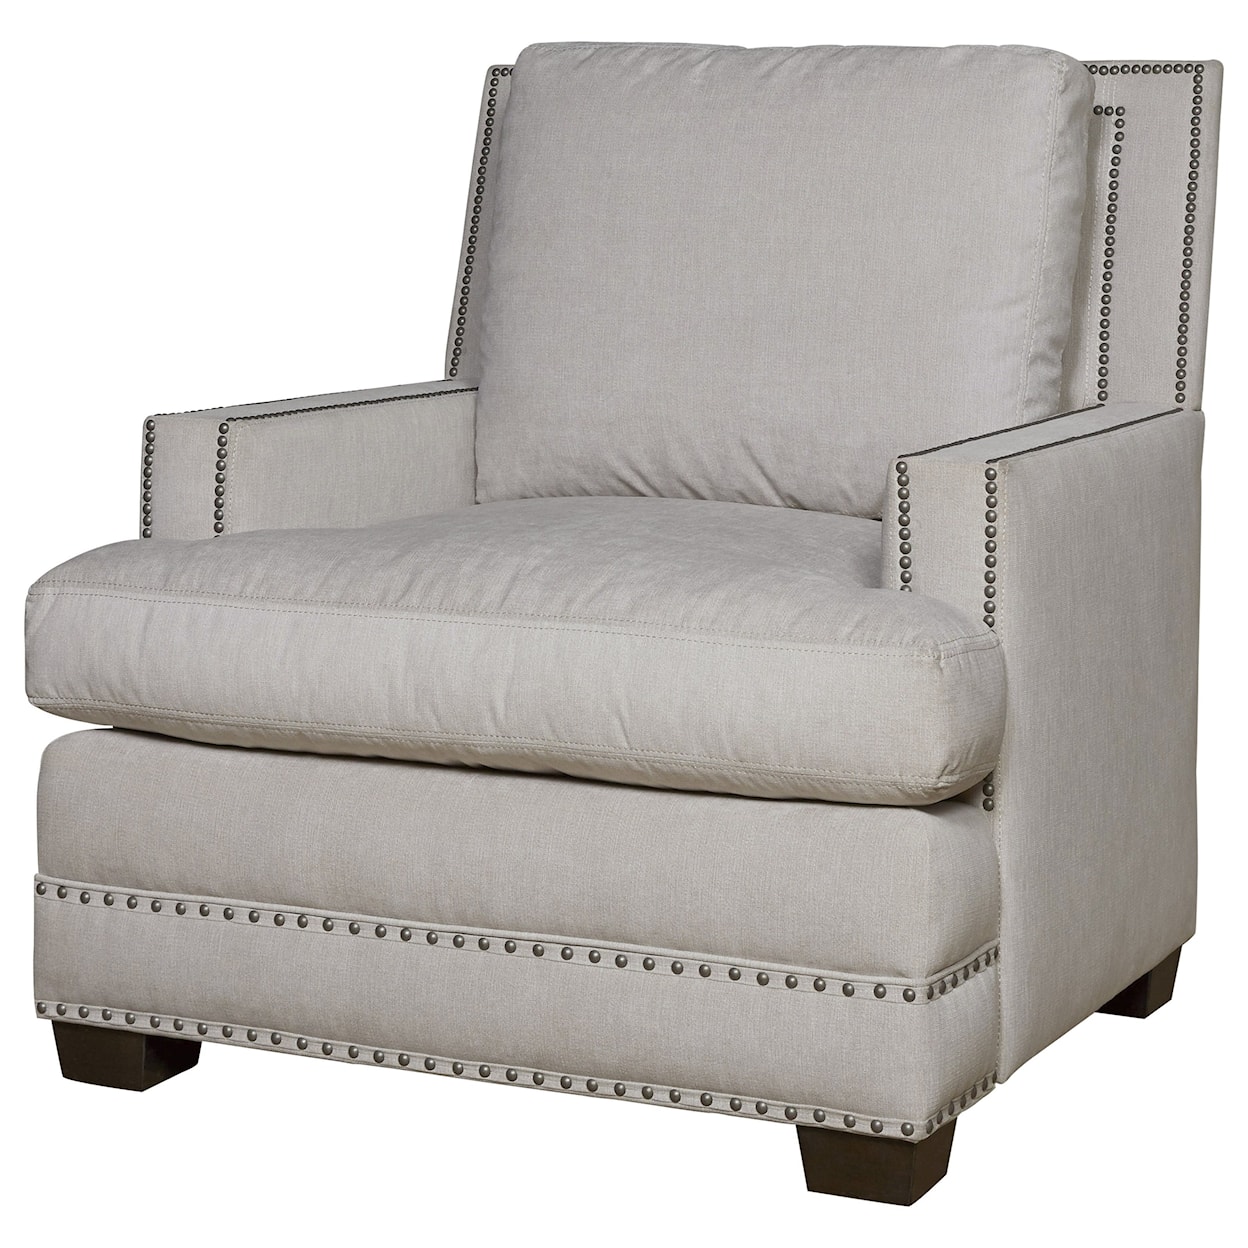 Universal Franklin Street Living Room Chair with Nail-Head Trim